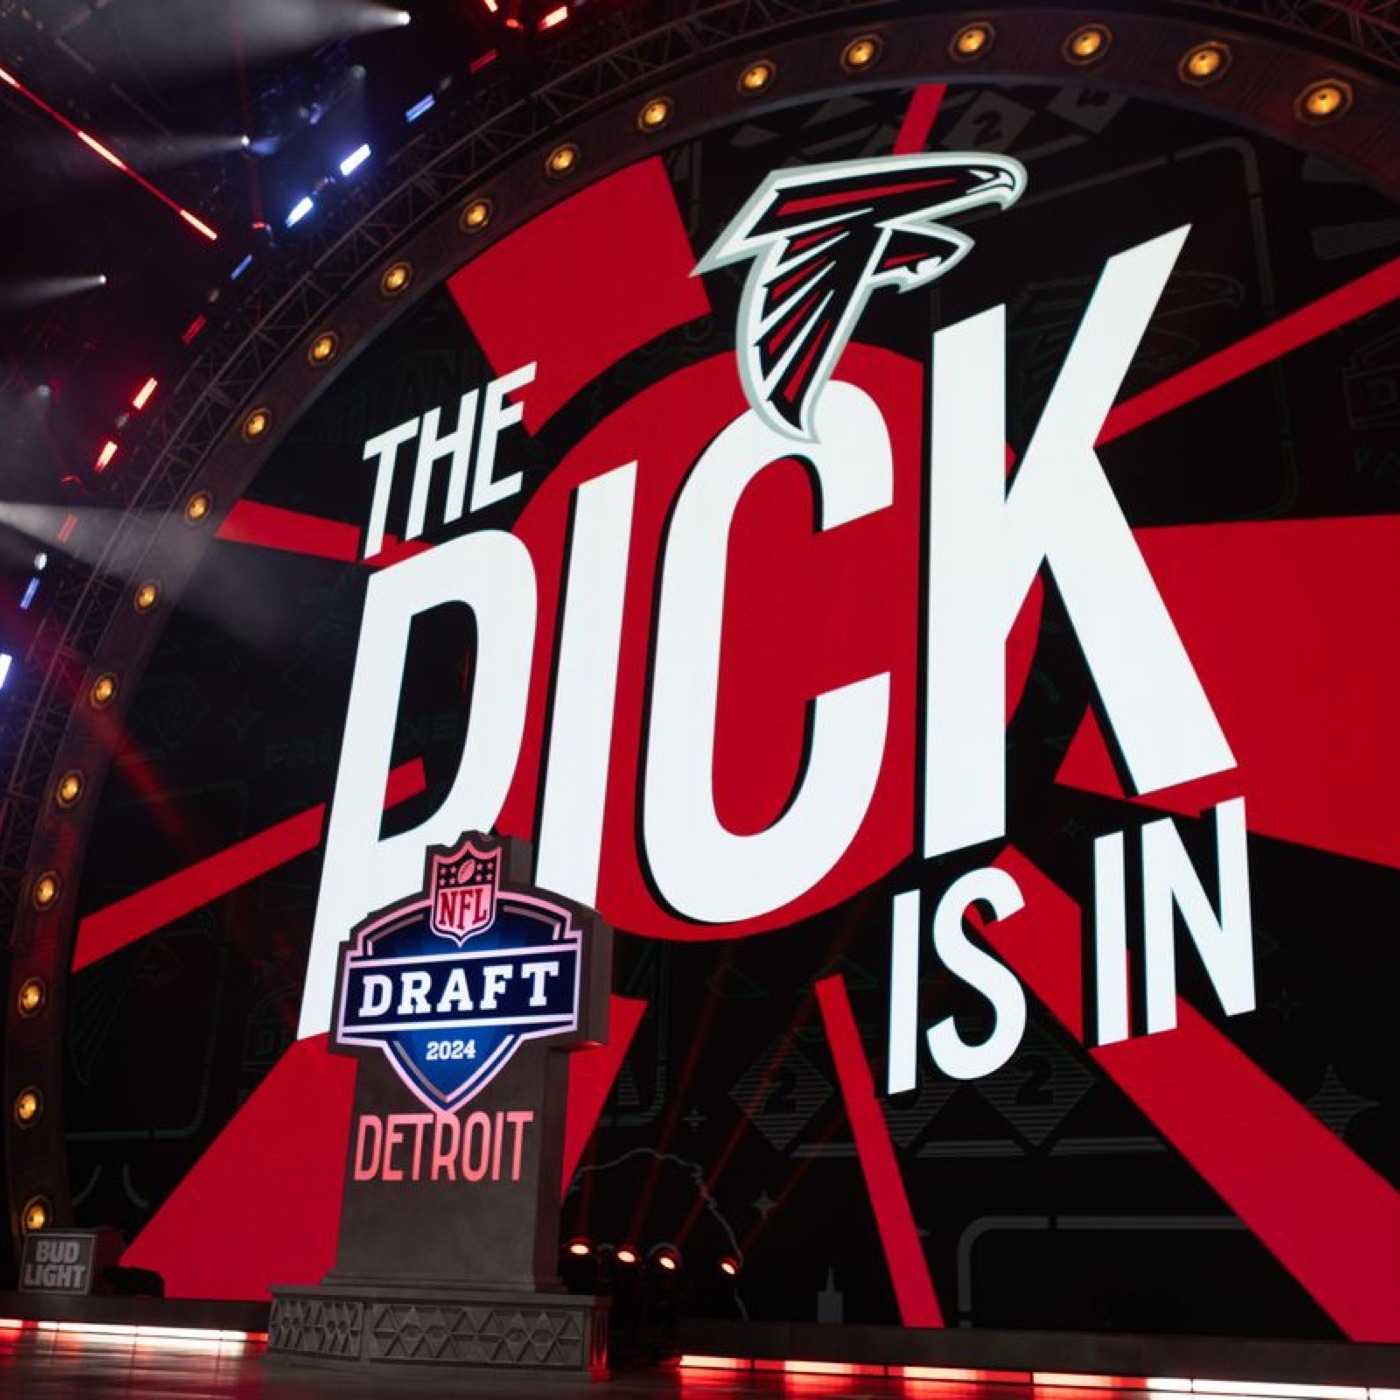 The Falcons Do Kirk Dirty on Draft Night